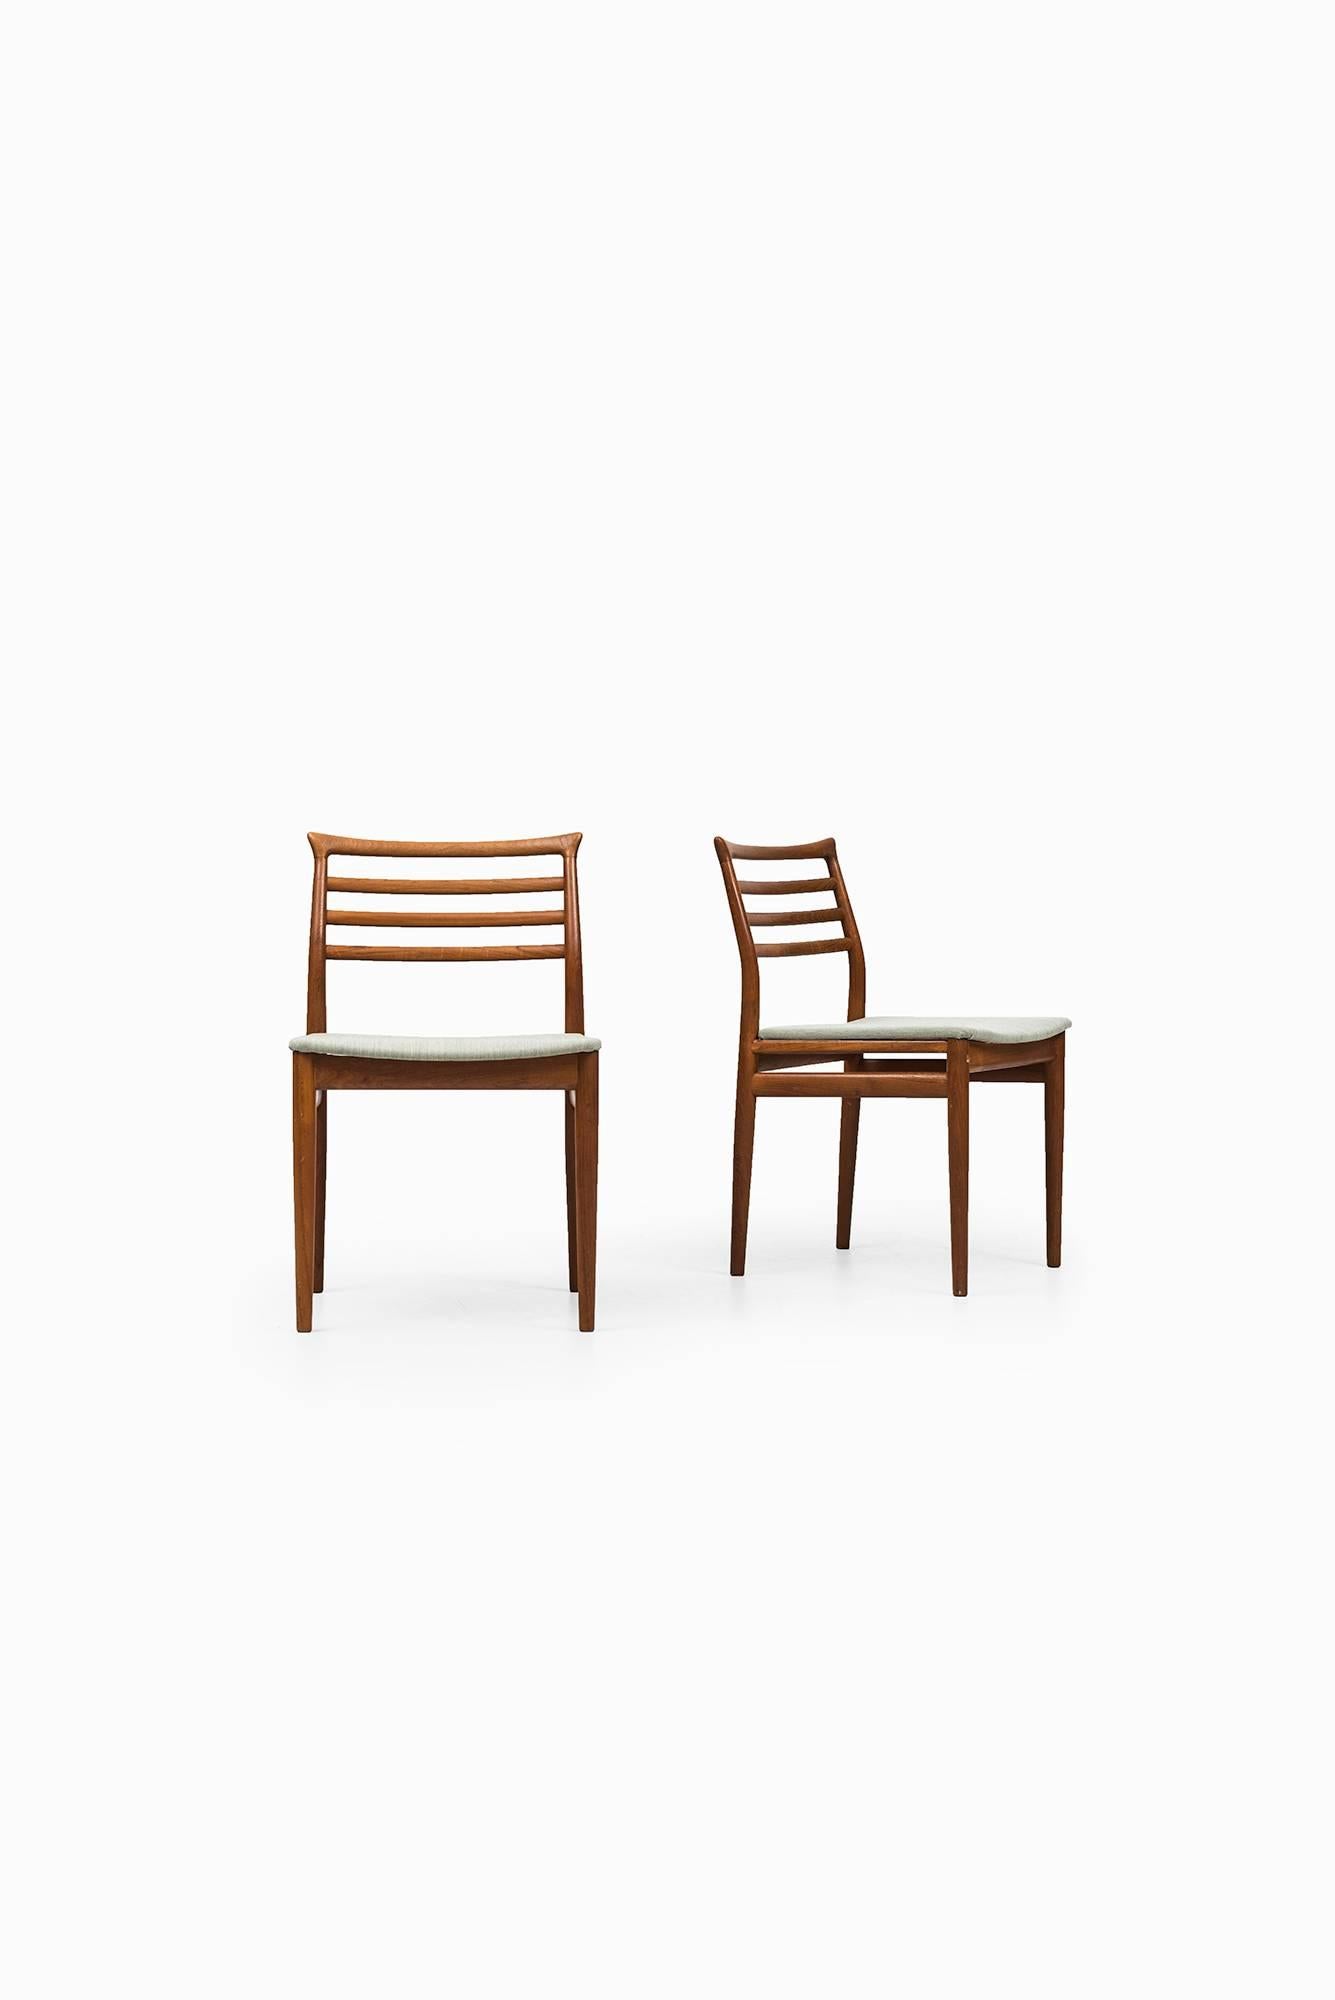 Rare set of eight dining chairs designed by Erling Torvits. Produced by Soro Stolefabrik in Denmark.